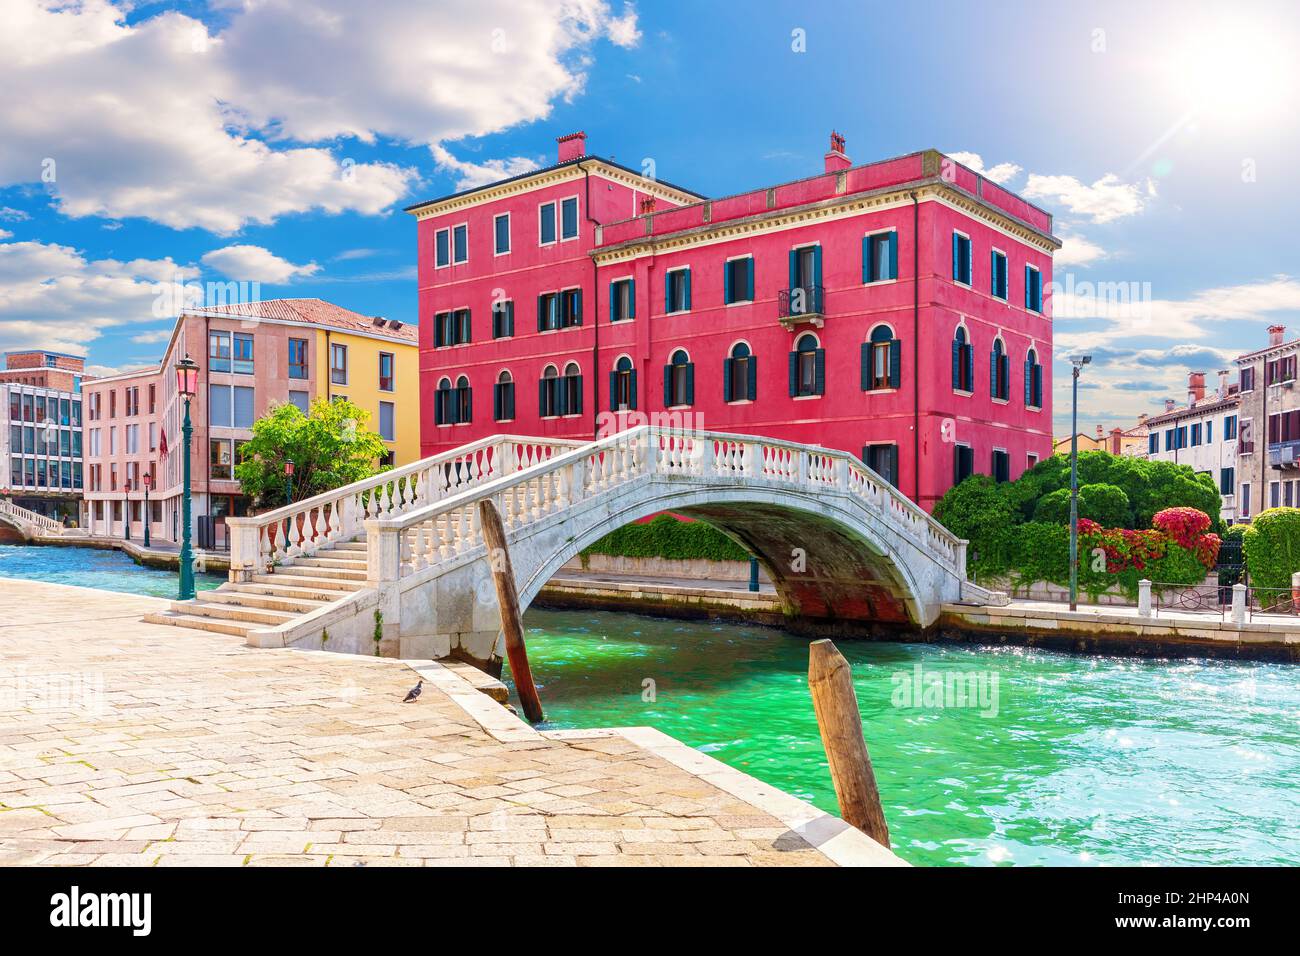 Bridge of Venice near a typical old palace, view from the canal, Italy. Stock Photo